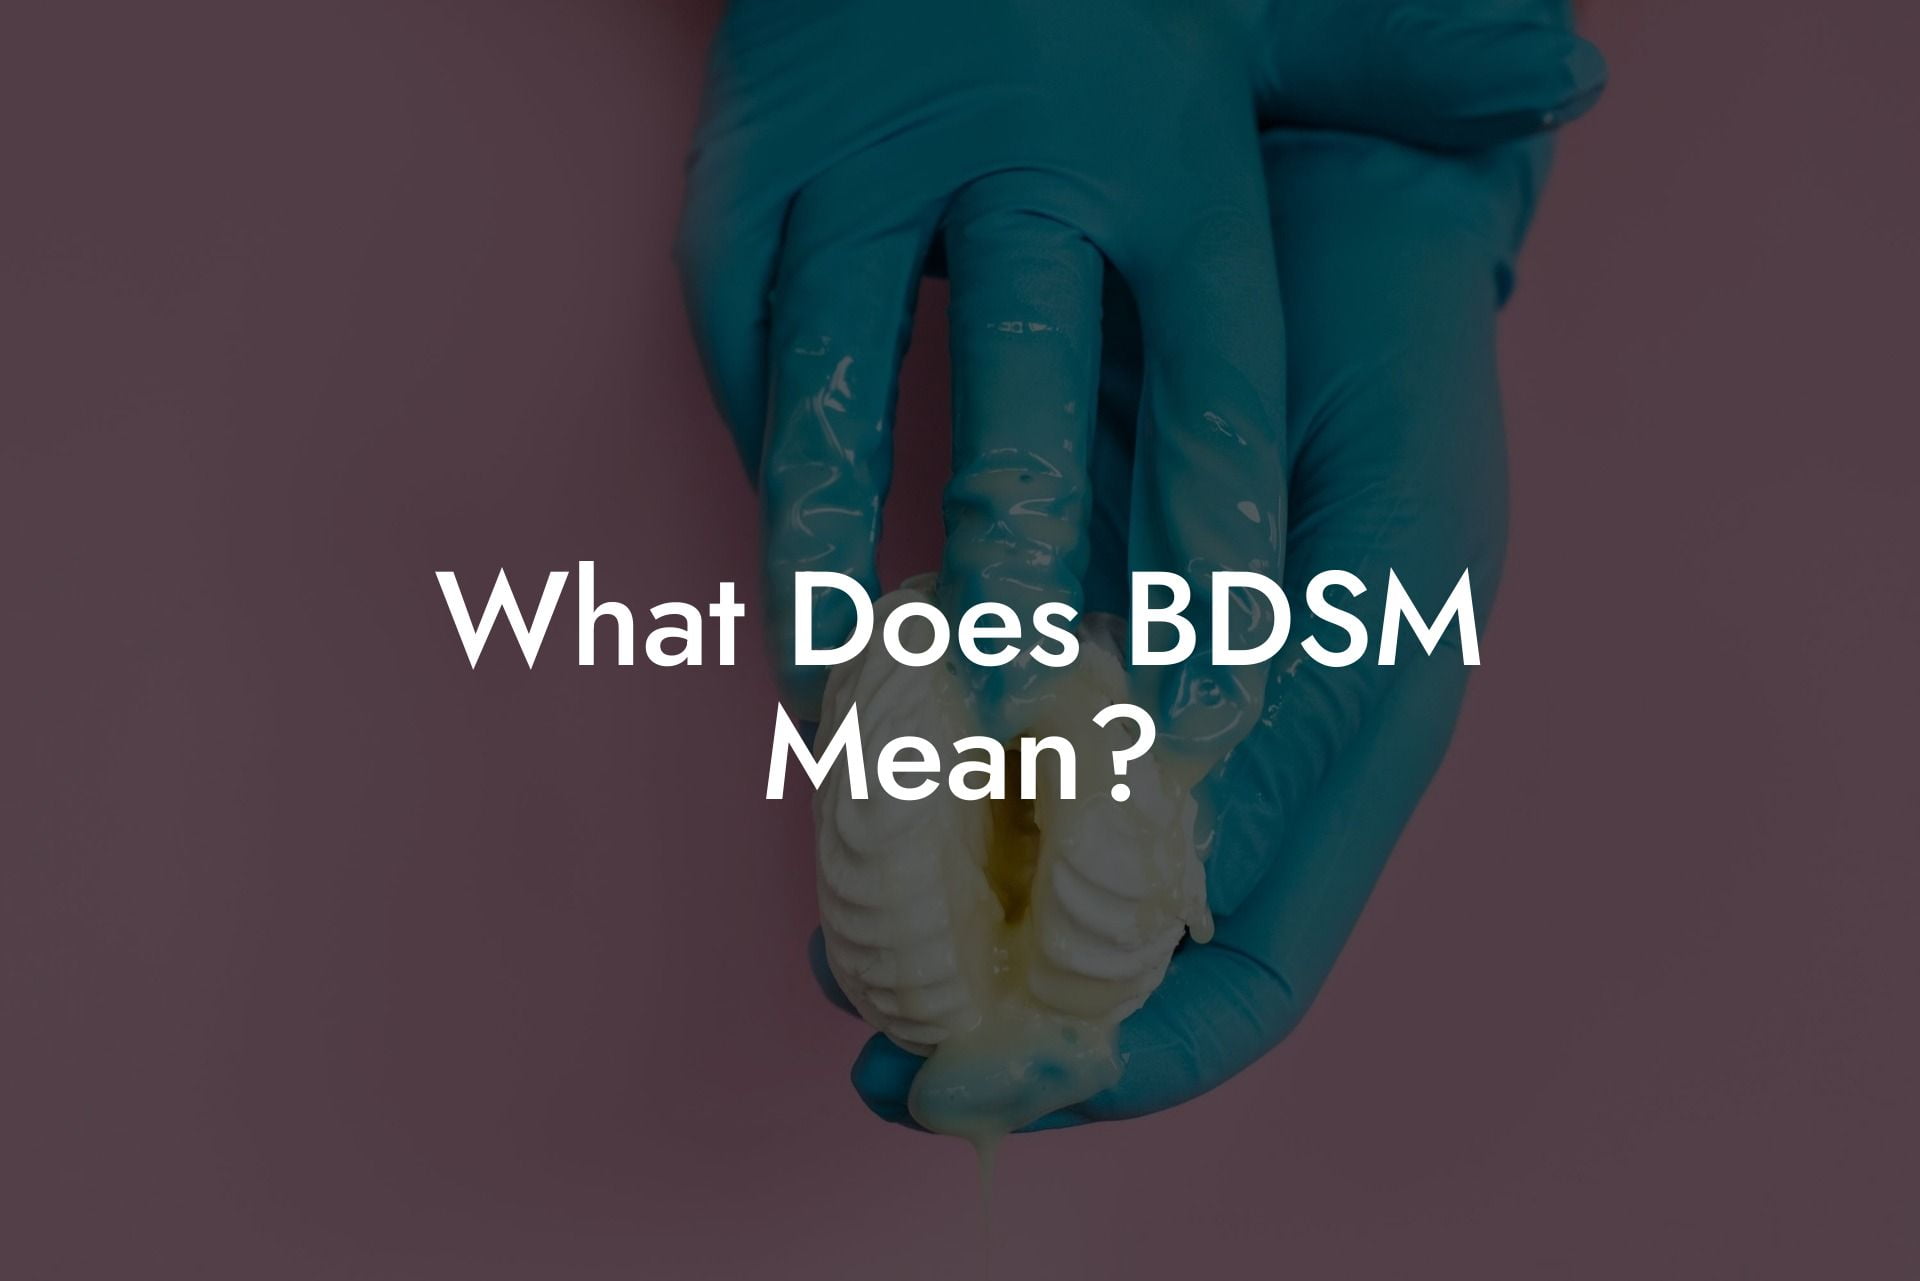 What Does BDSM Mean